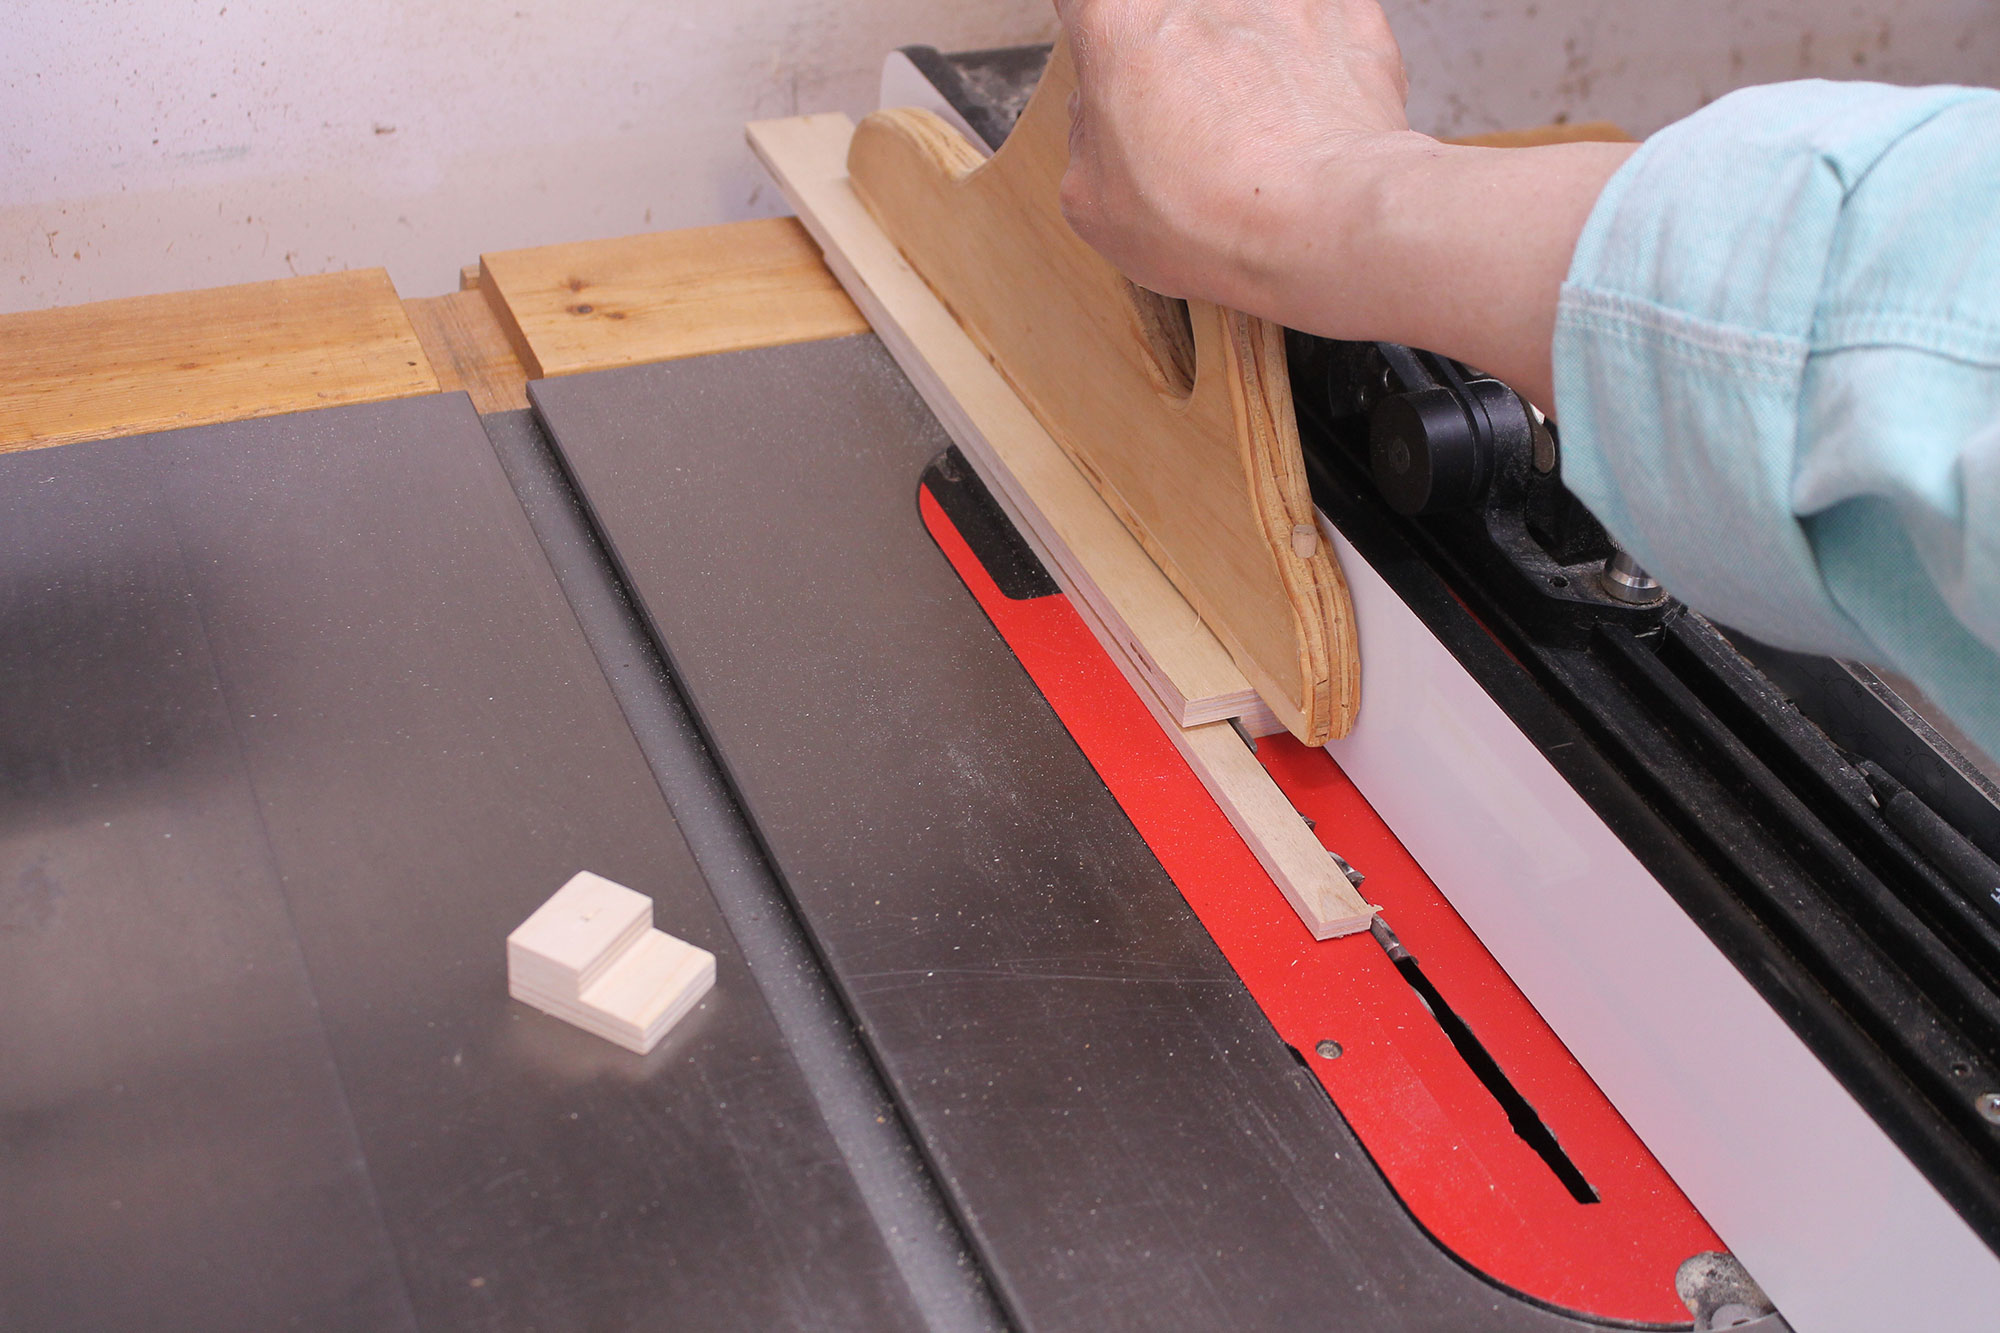 Milling a rabbeted strip on the table saw